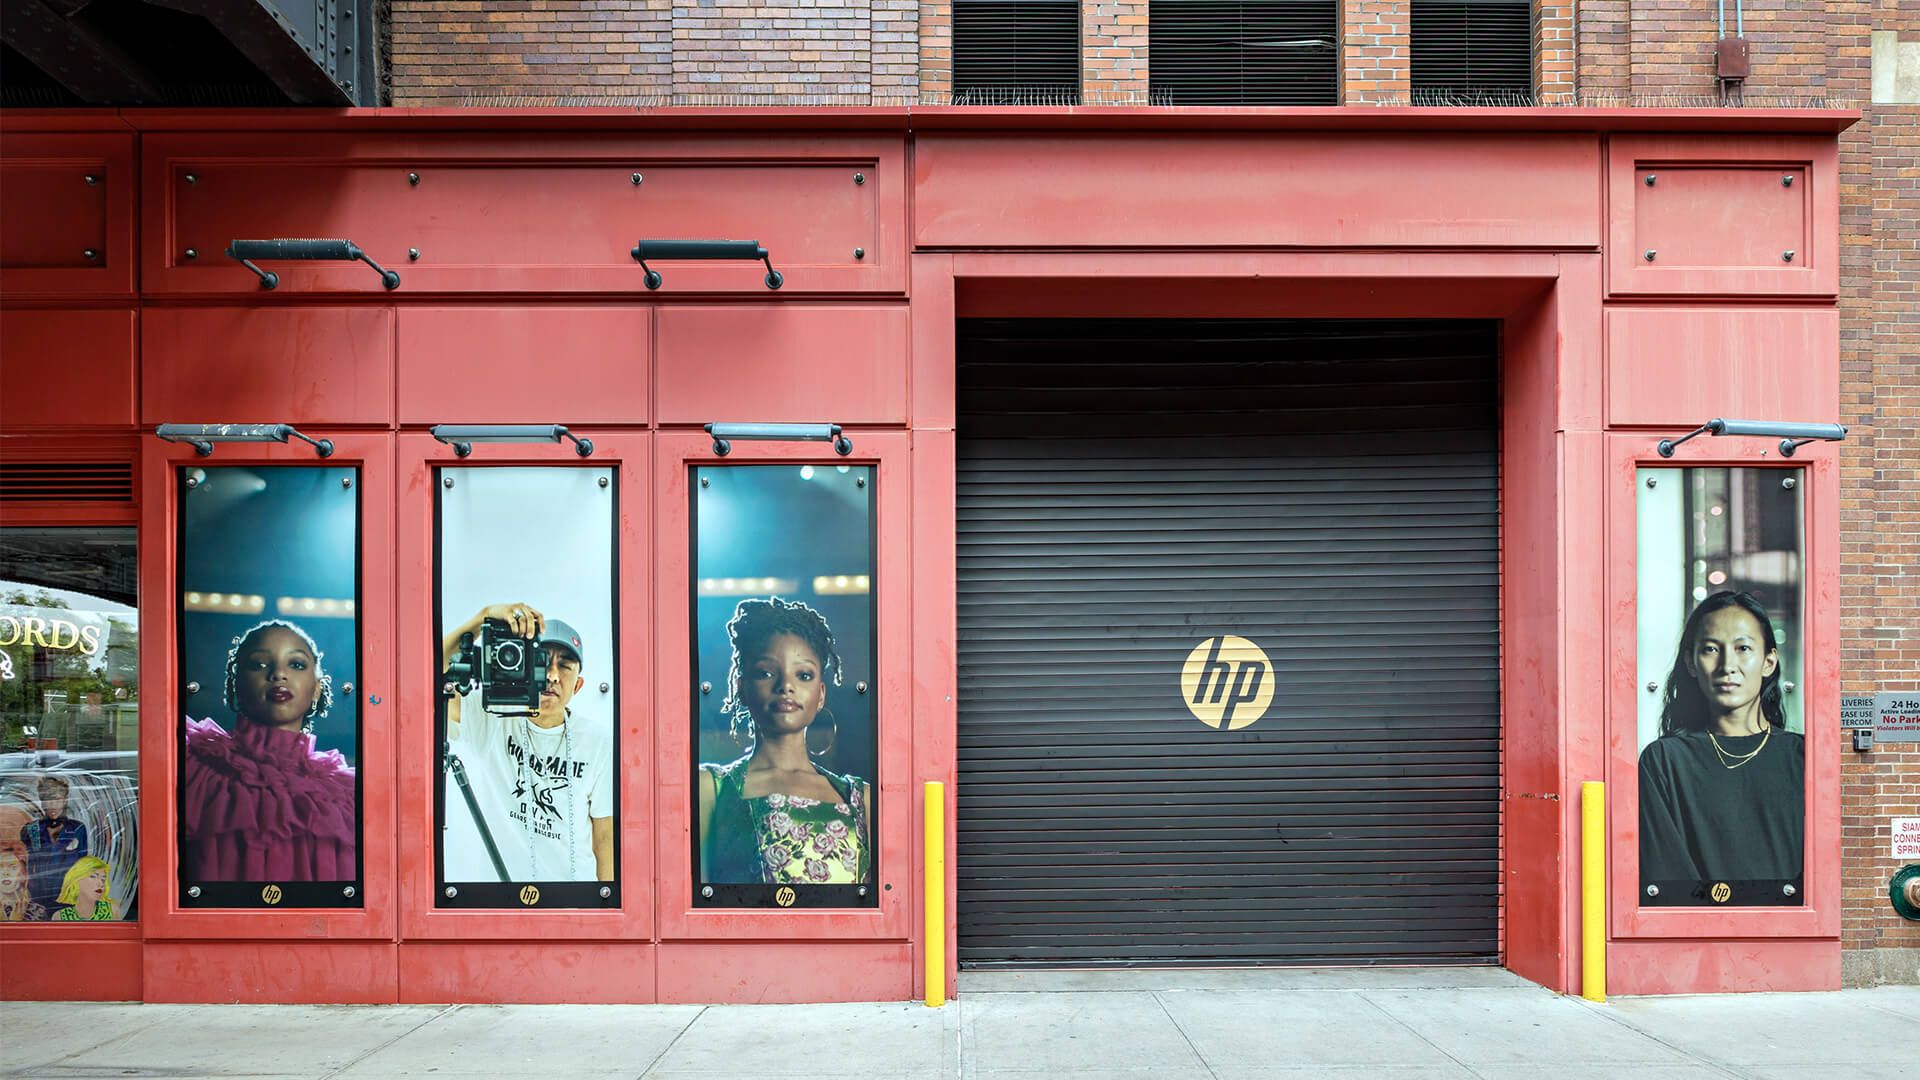 Outside of building for HP launch event in NYC. Posters of artists and garage door with hp logo